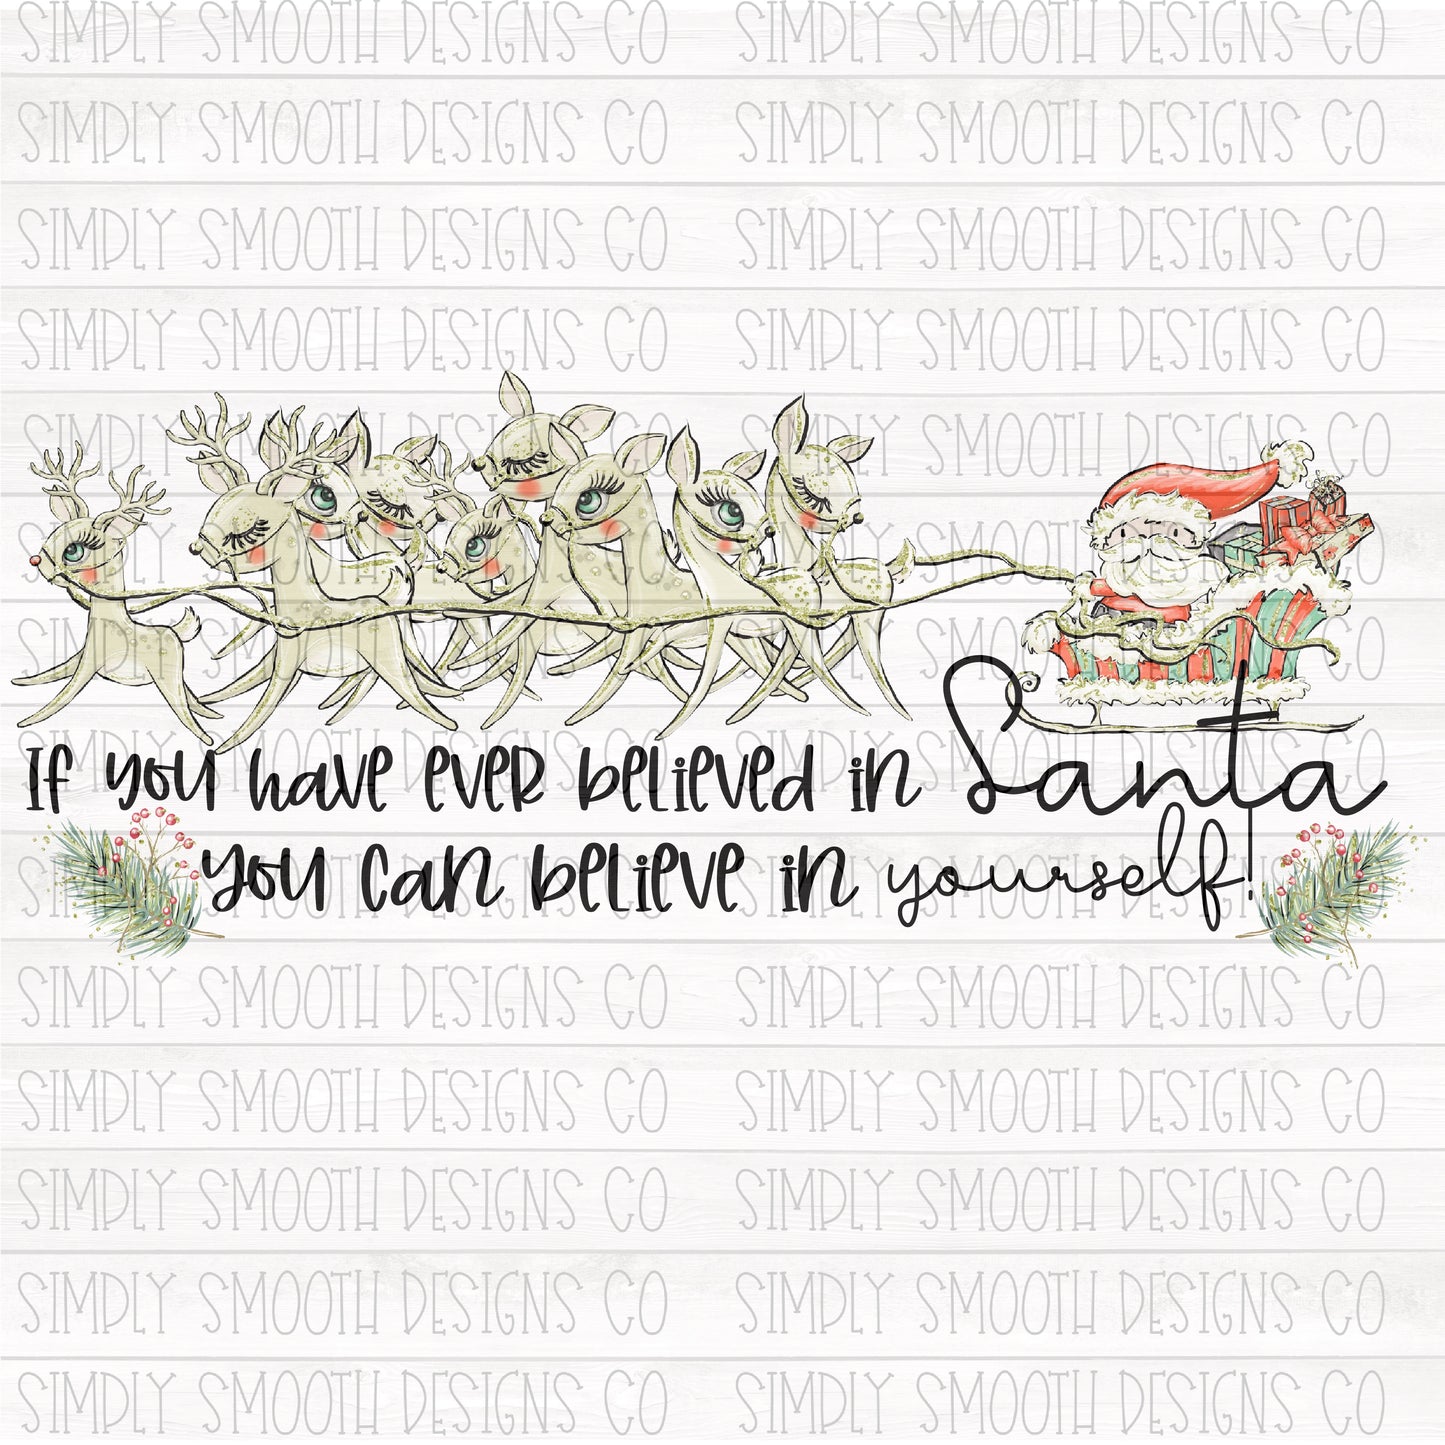 If you have ever believed in Santa you can believe in yourself